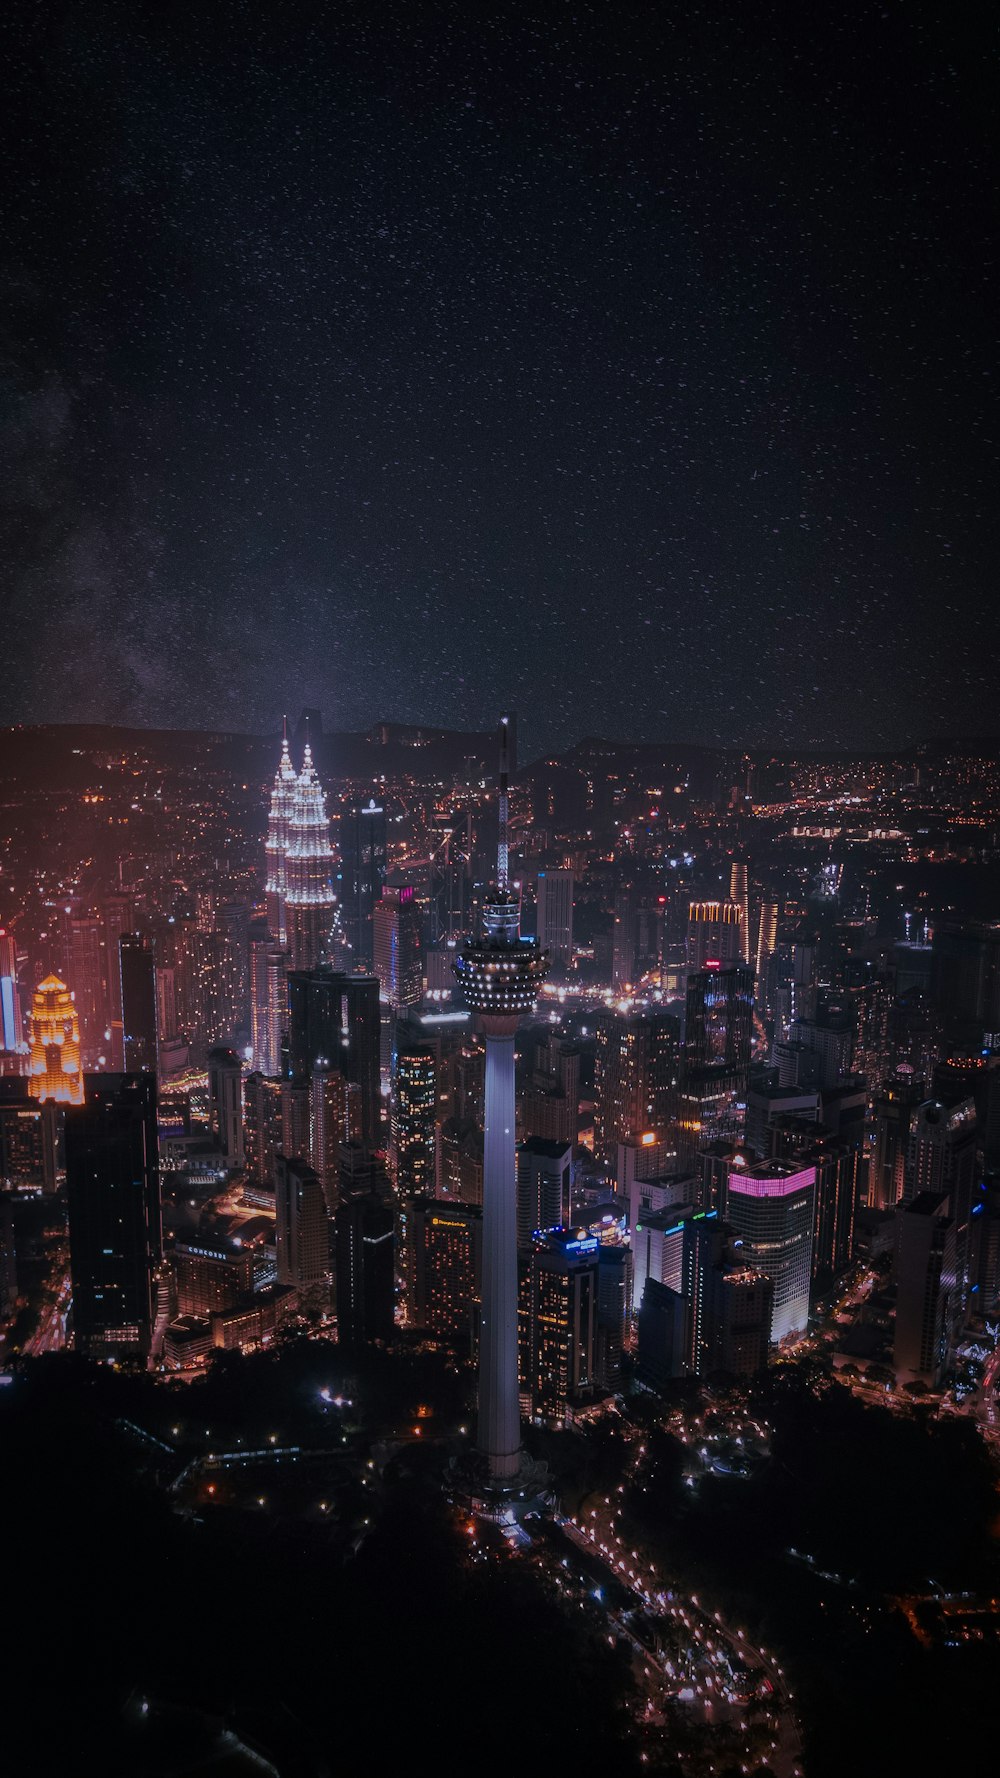 500 City Night Pictures Hd Download Free Images On Unsplash